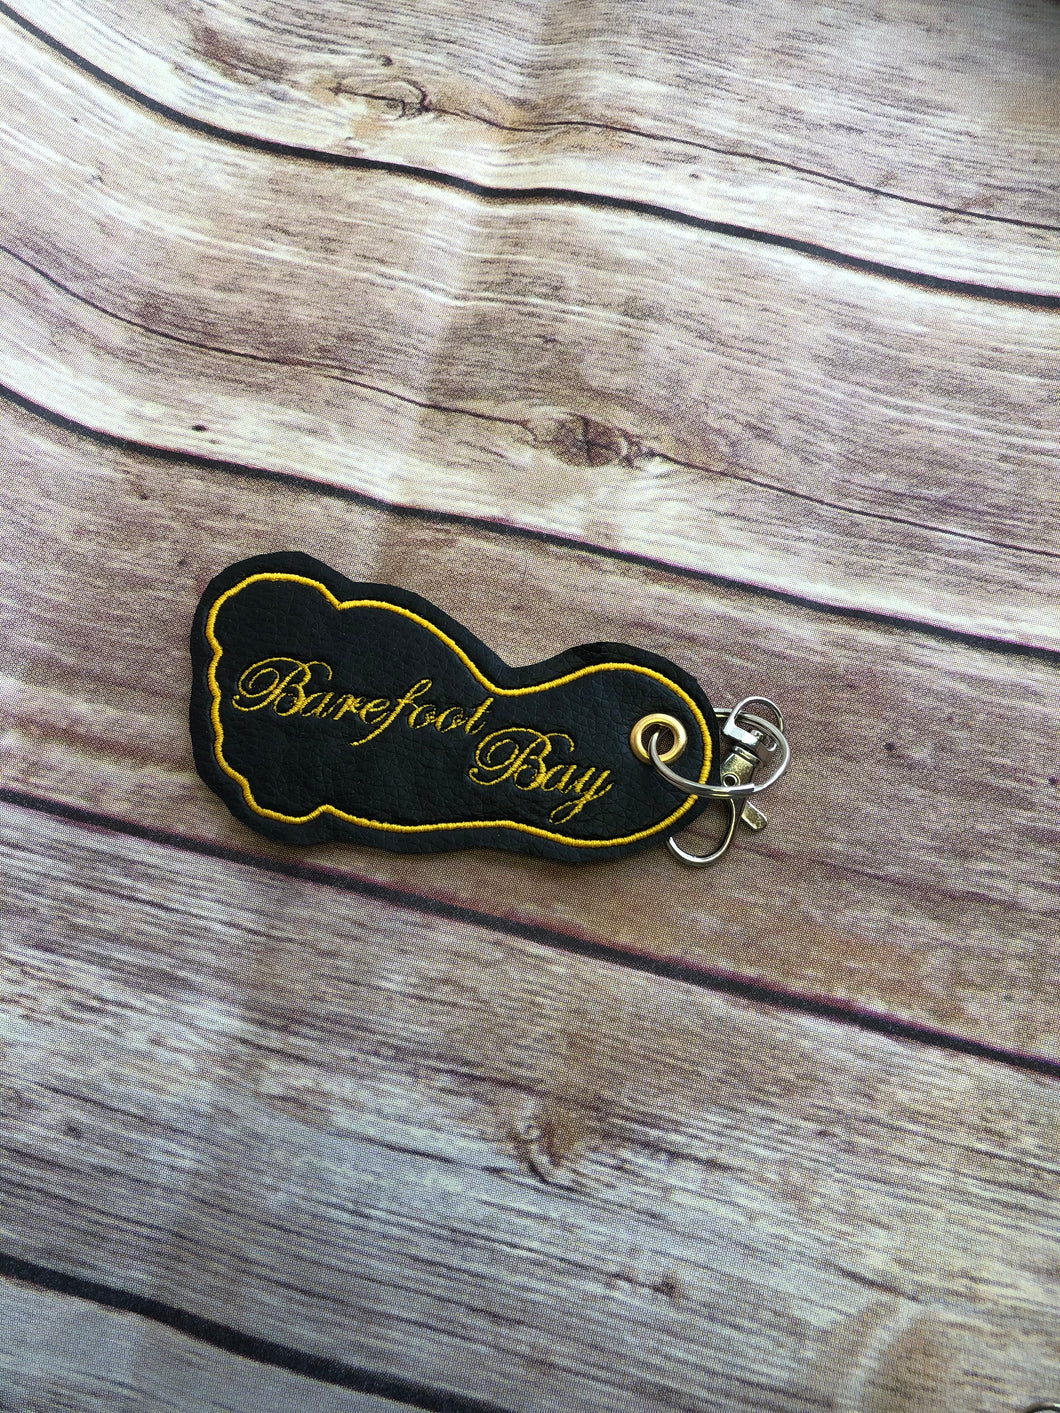 Barefoot Bay Key Fob  Machine Embroidered